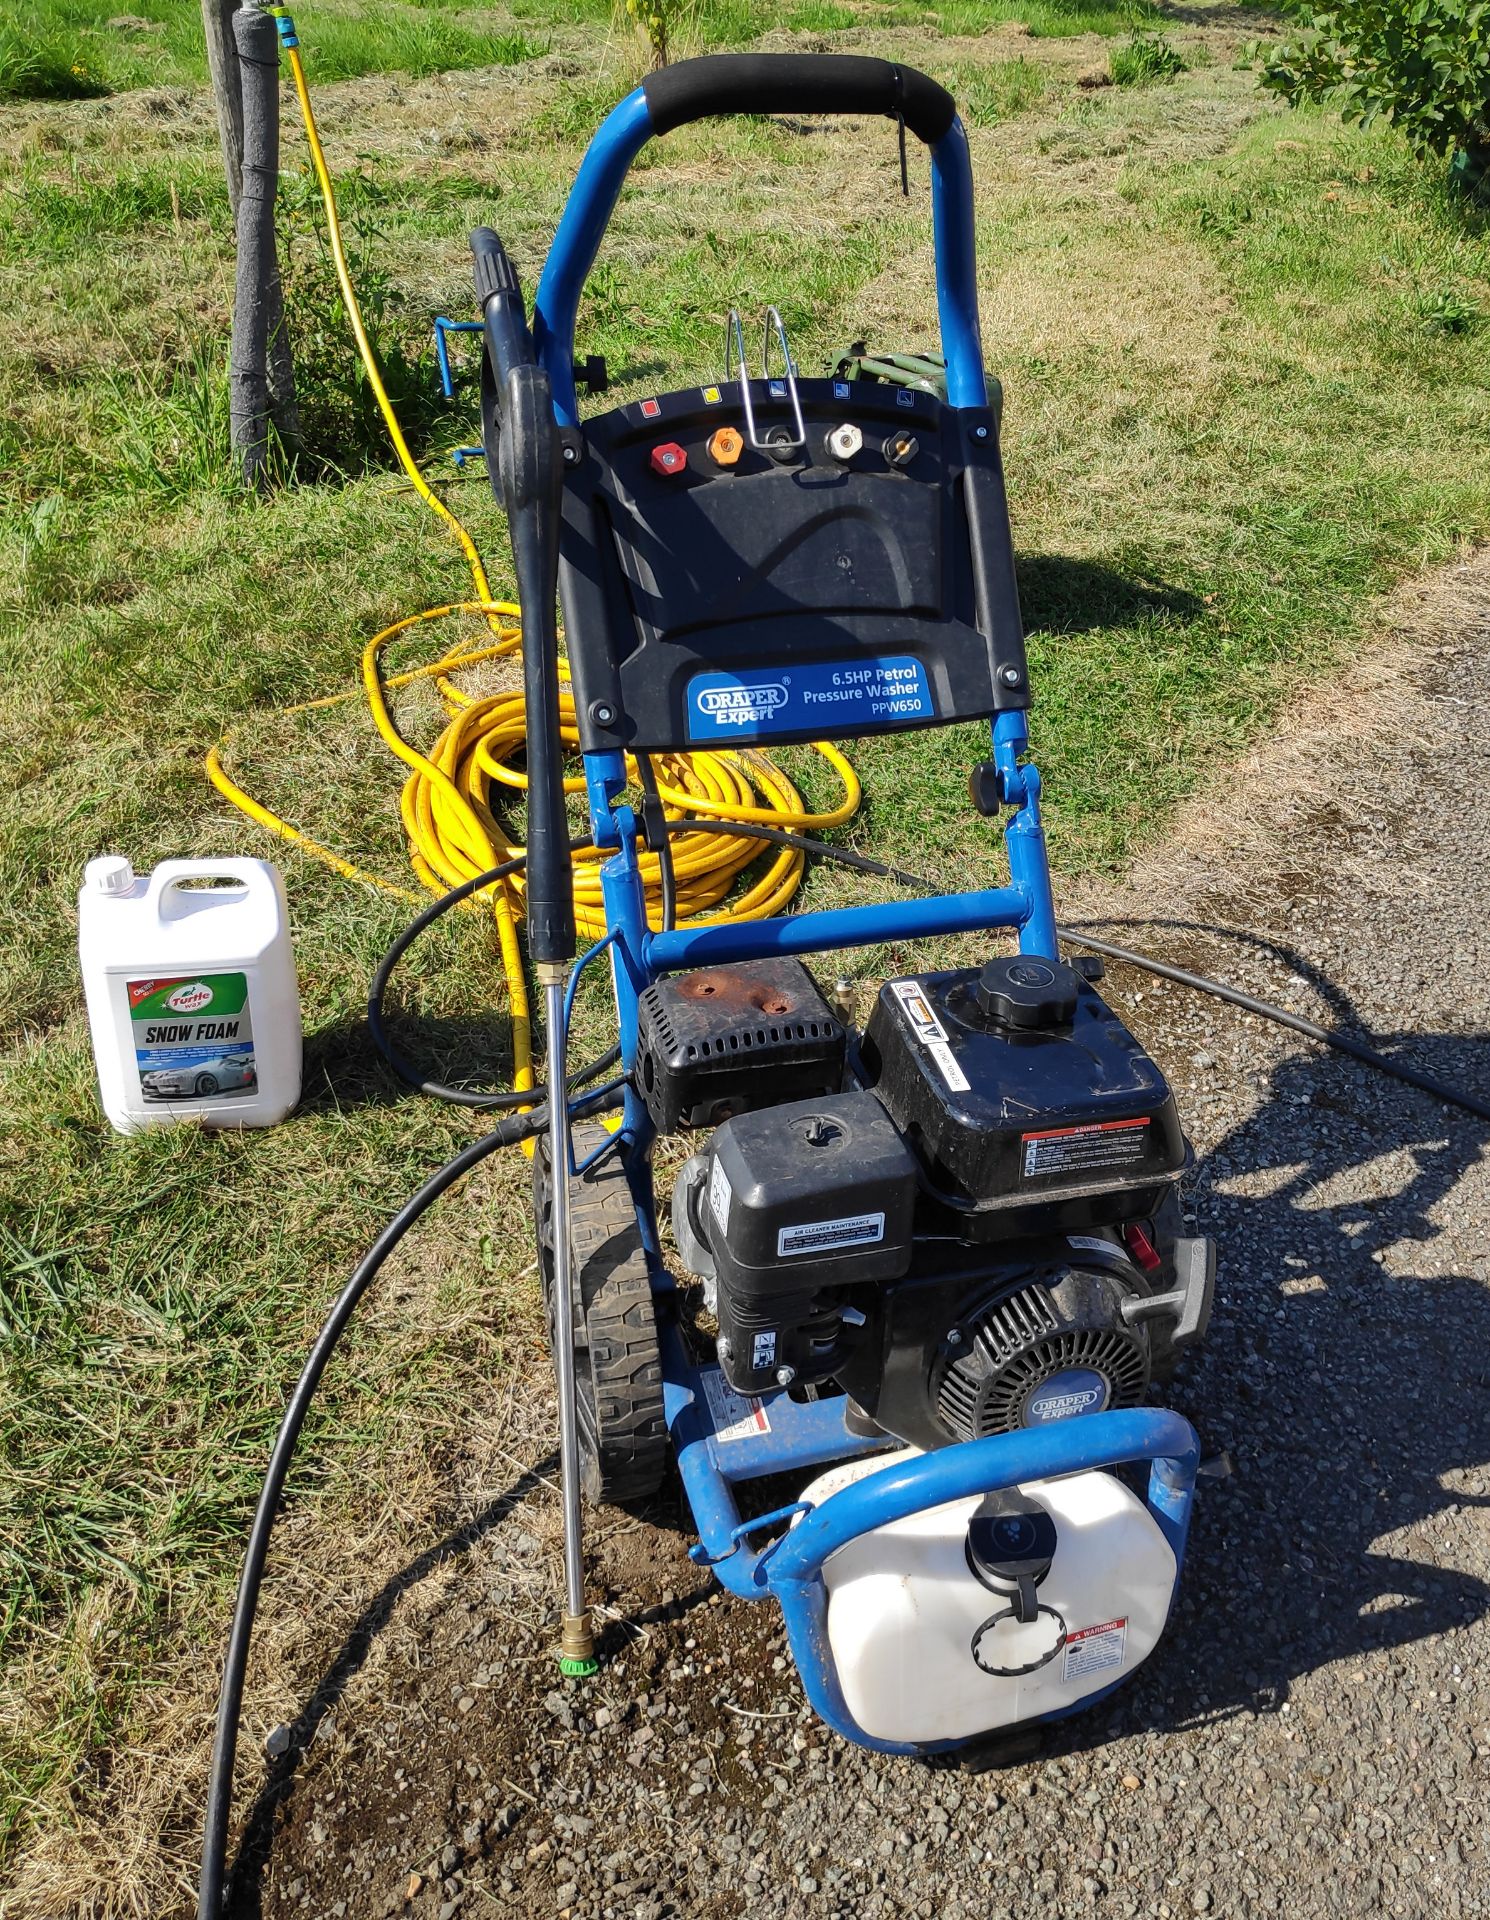 1 x Draper Expert 6.5Hp Petrol Pressure Washer PPW650 - CL011 - Location: Corby, Northamptonshire - Image 2 of 10